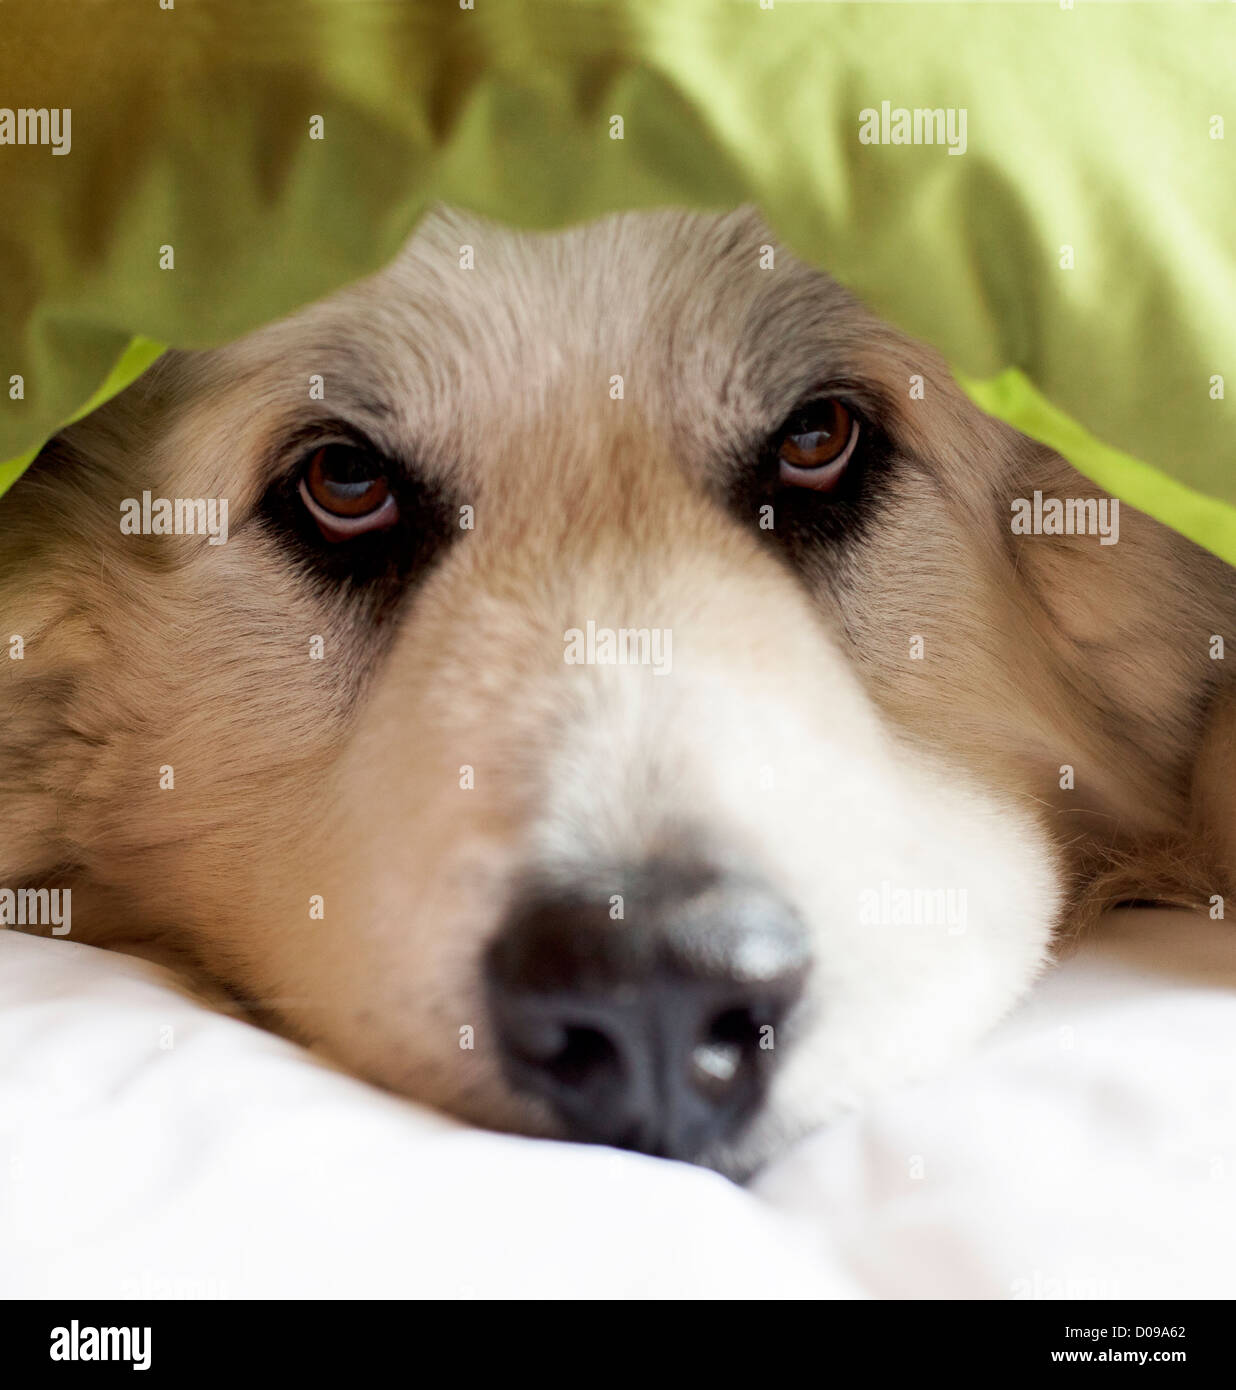 Great Pyrenees dog peeking out from blanket. Stock Photo